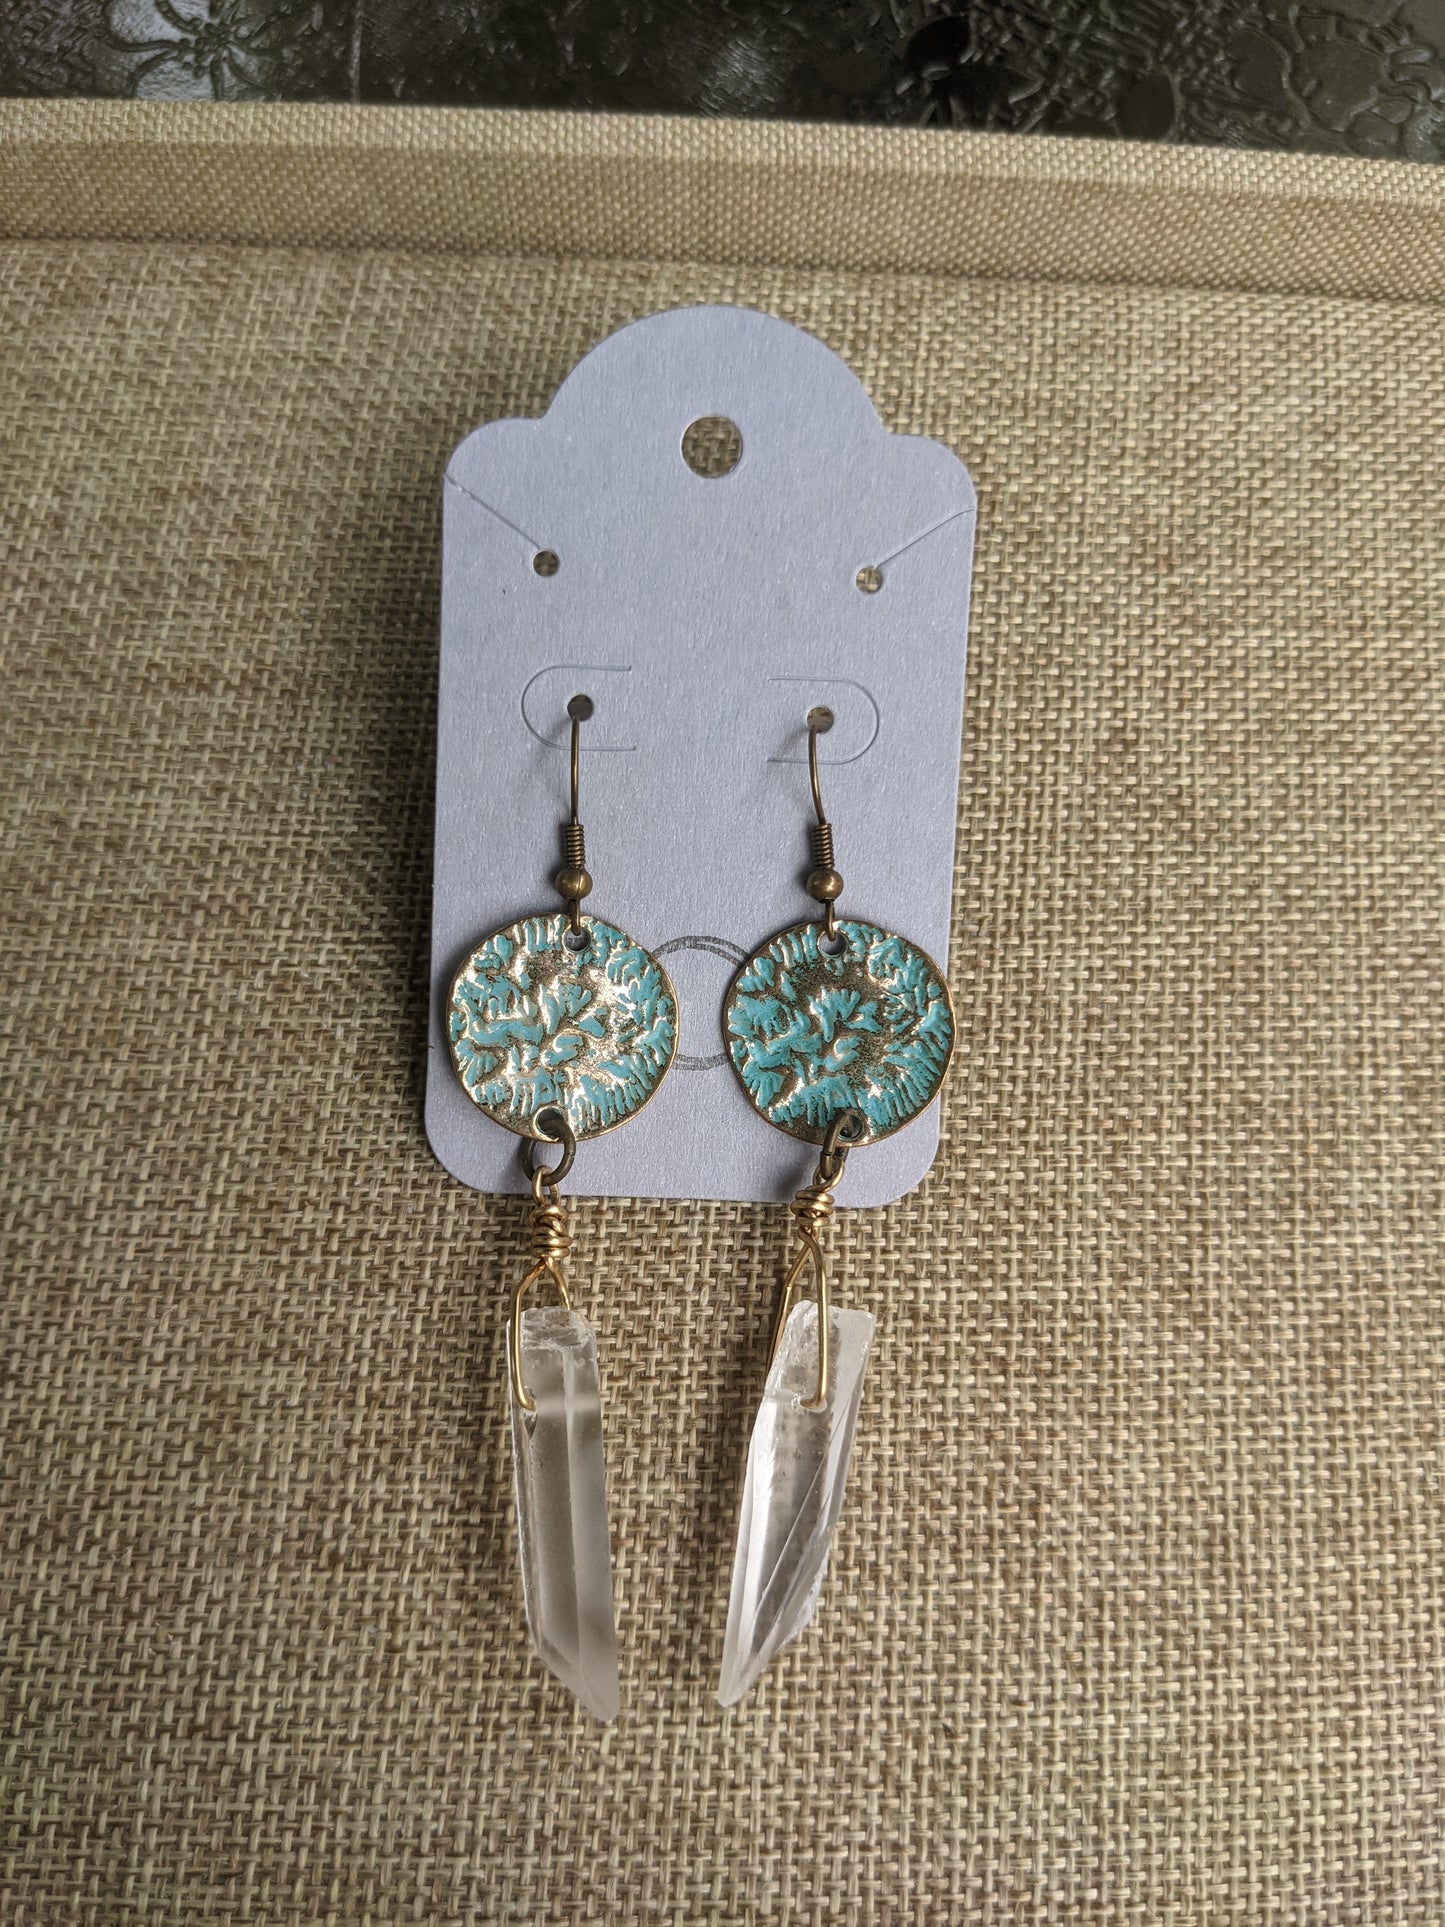 Patina Hammered Circles and Quartz Crystal Statement Earrings